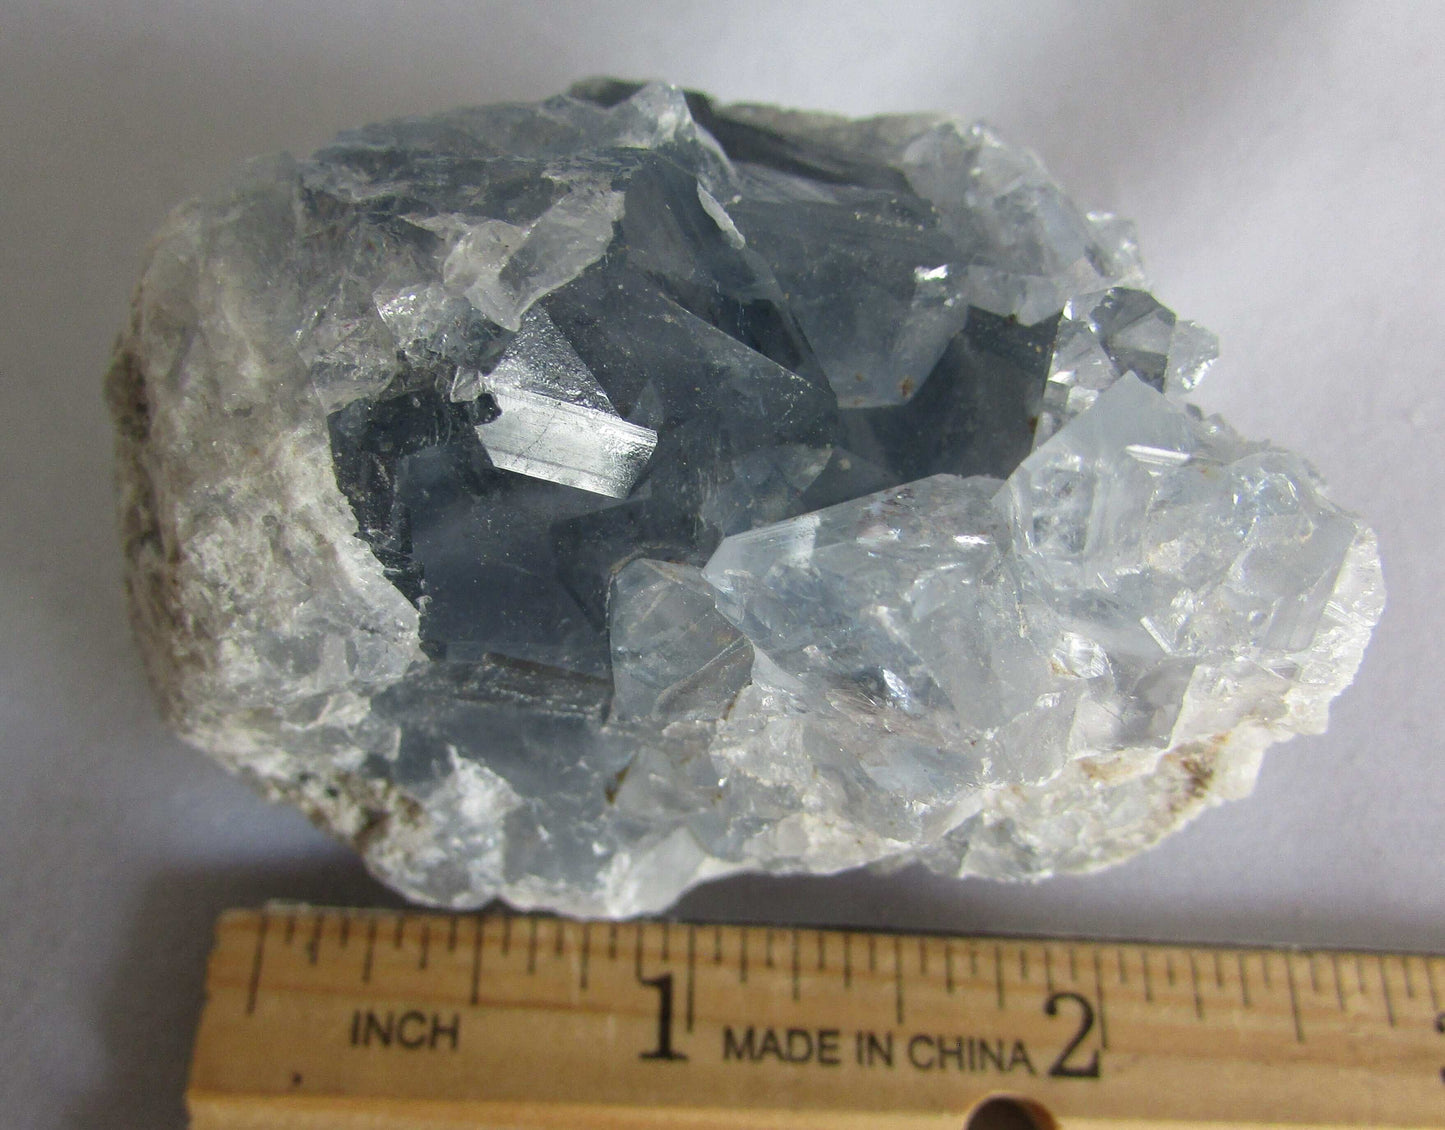 Genuine natural Gemmy Celestite Crystal Geode ethically sourced from Madagascar